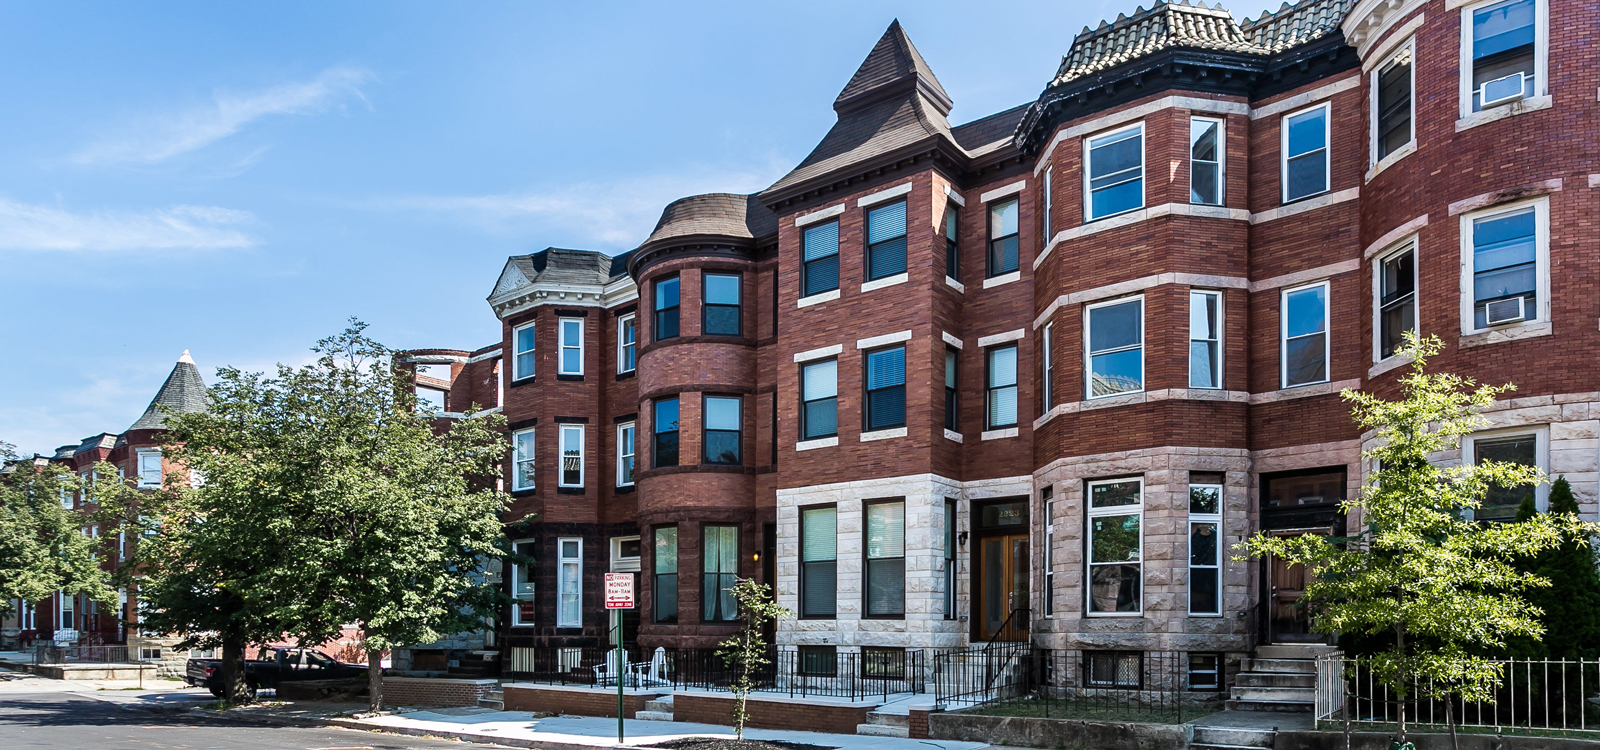 Callow Ave. NSP2 Housing Project, Baltimore, MD, residential renovation by UrbanBuilt